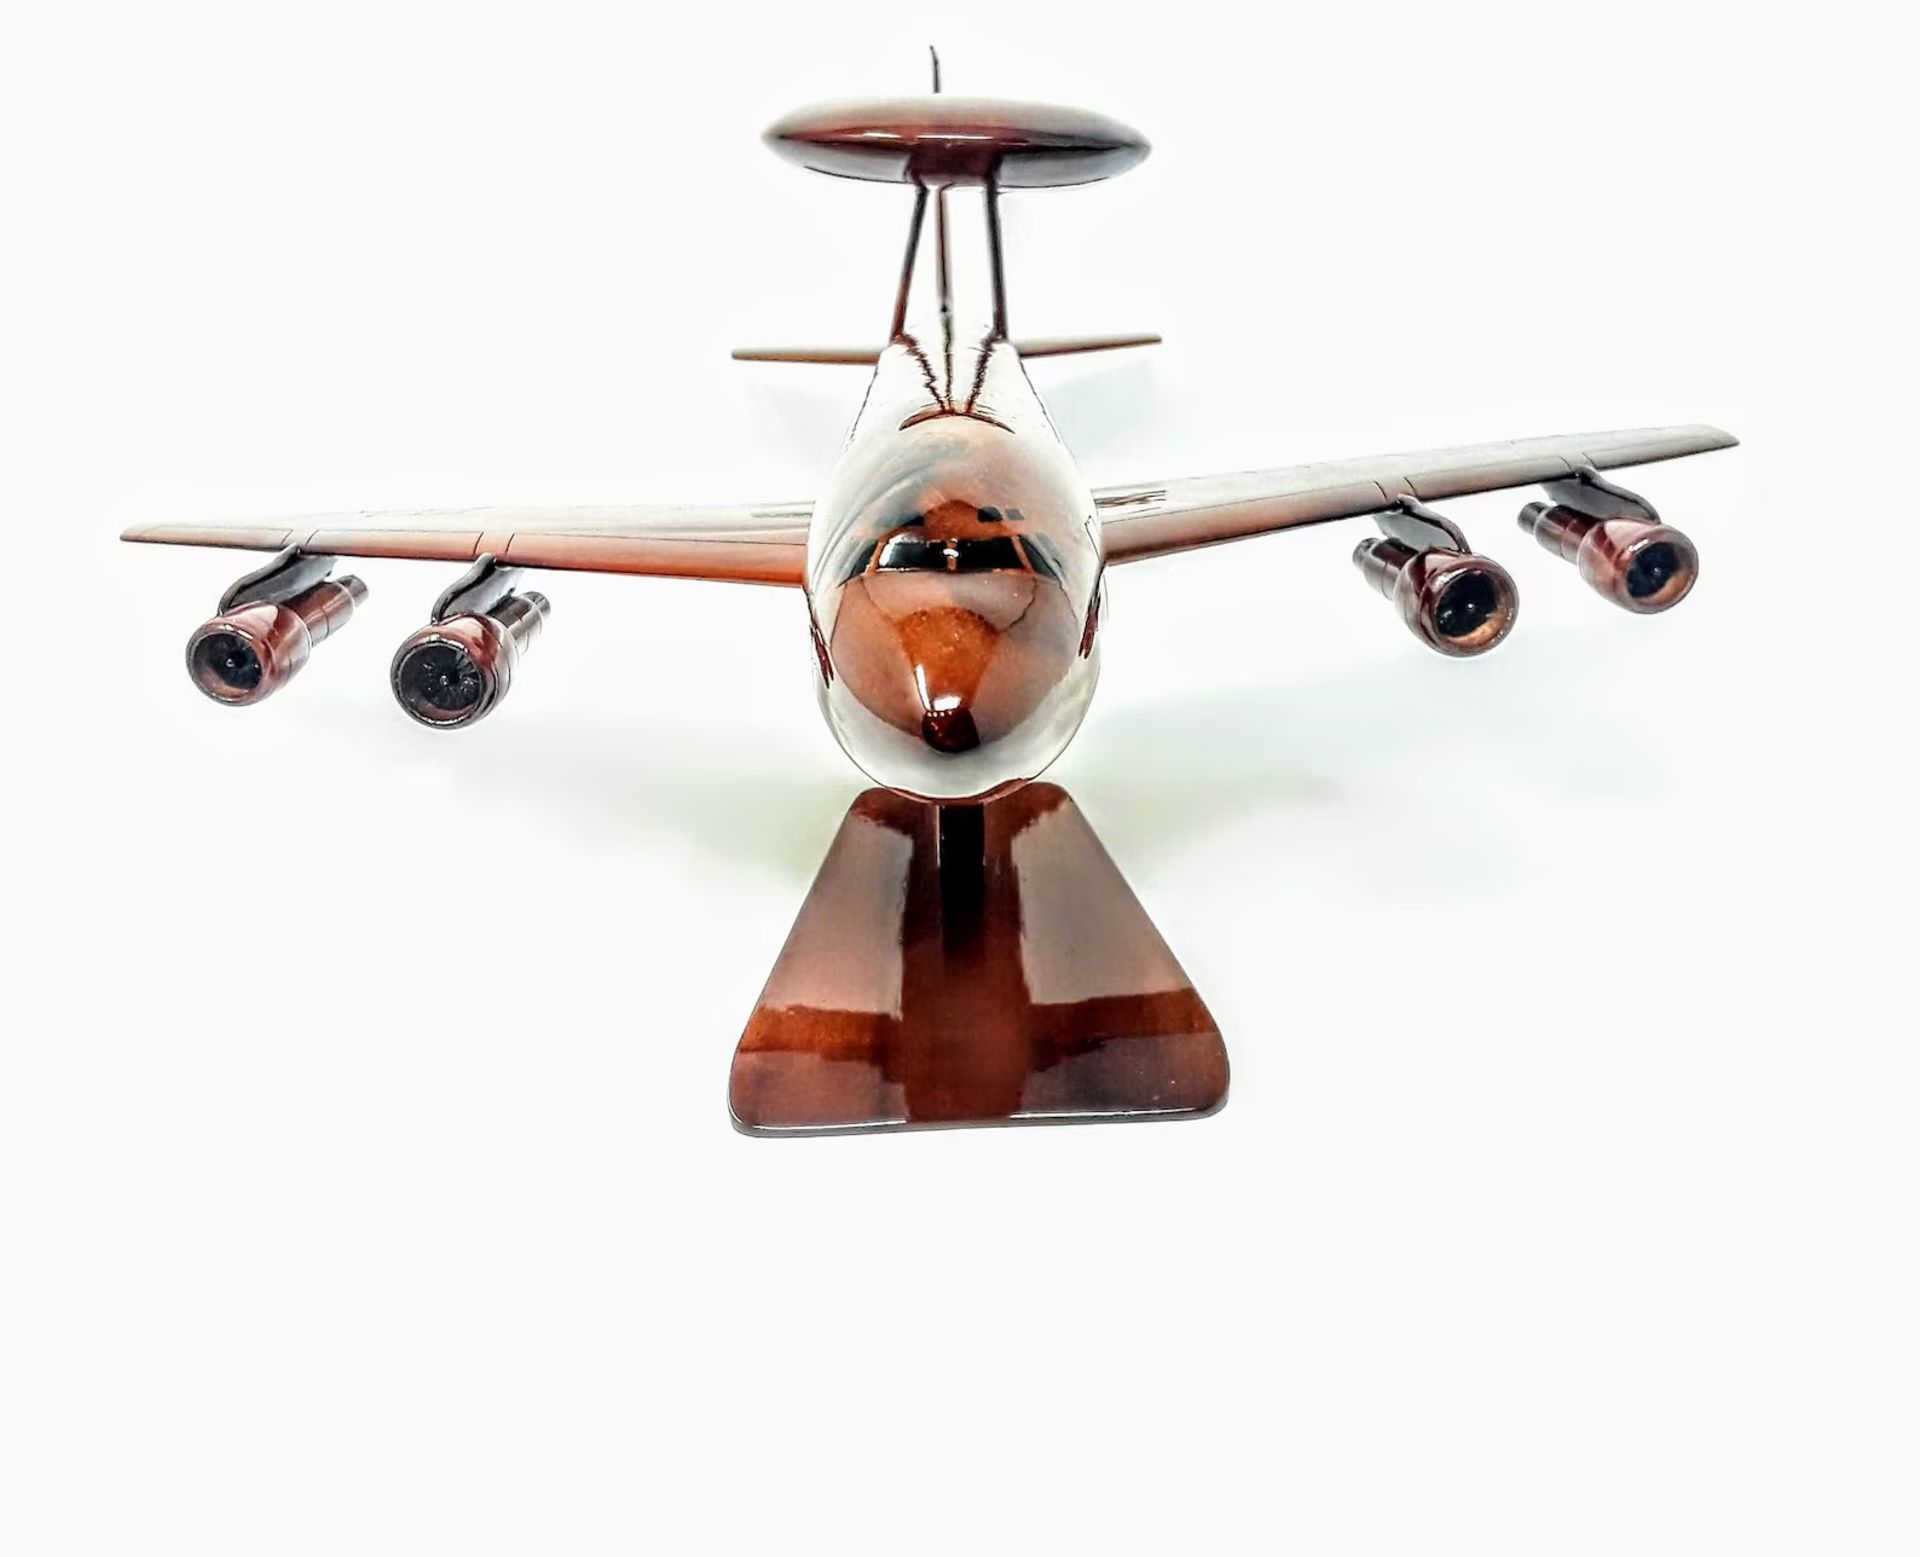 Boeing 707 "E3 AWACS" Wooden Scale Desk Display - Image 2 of 4